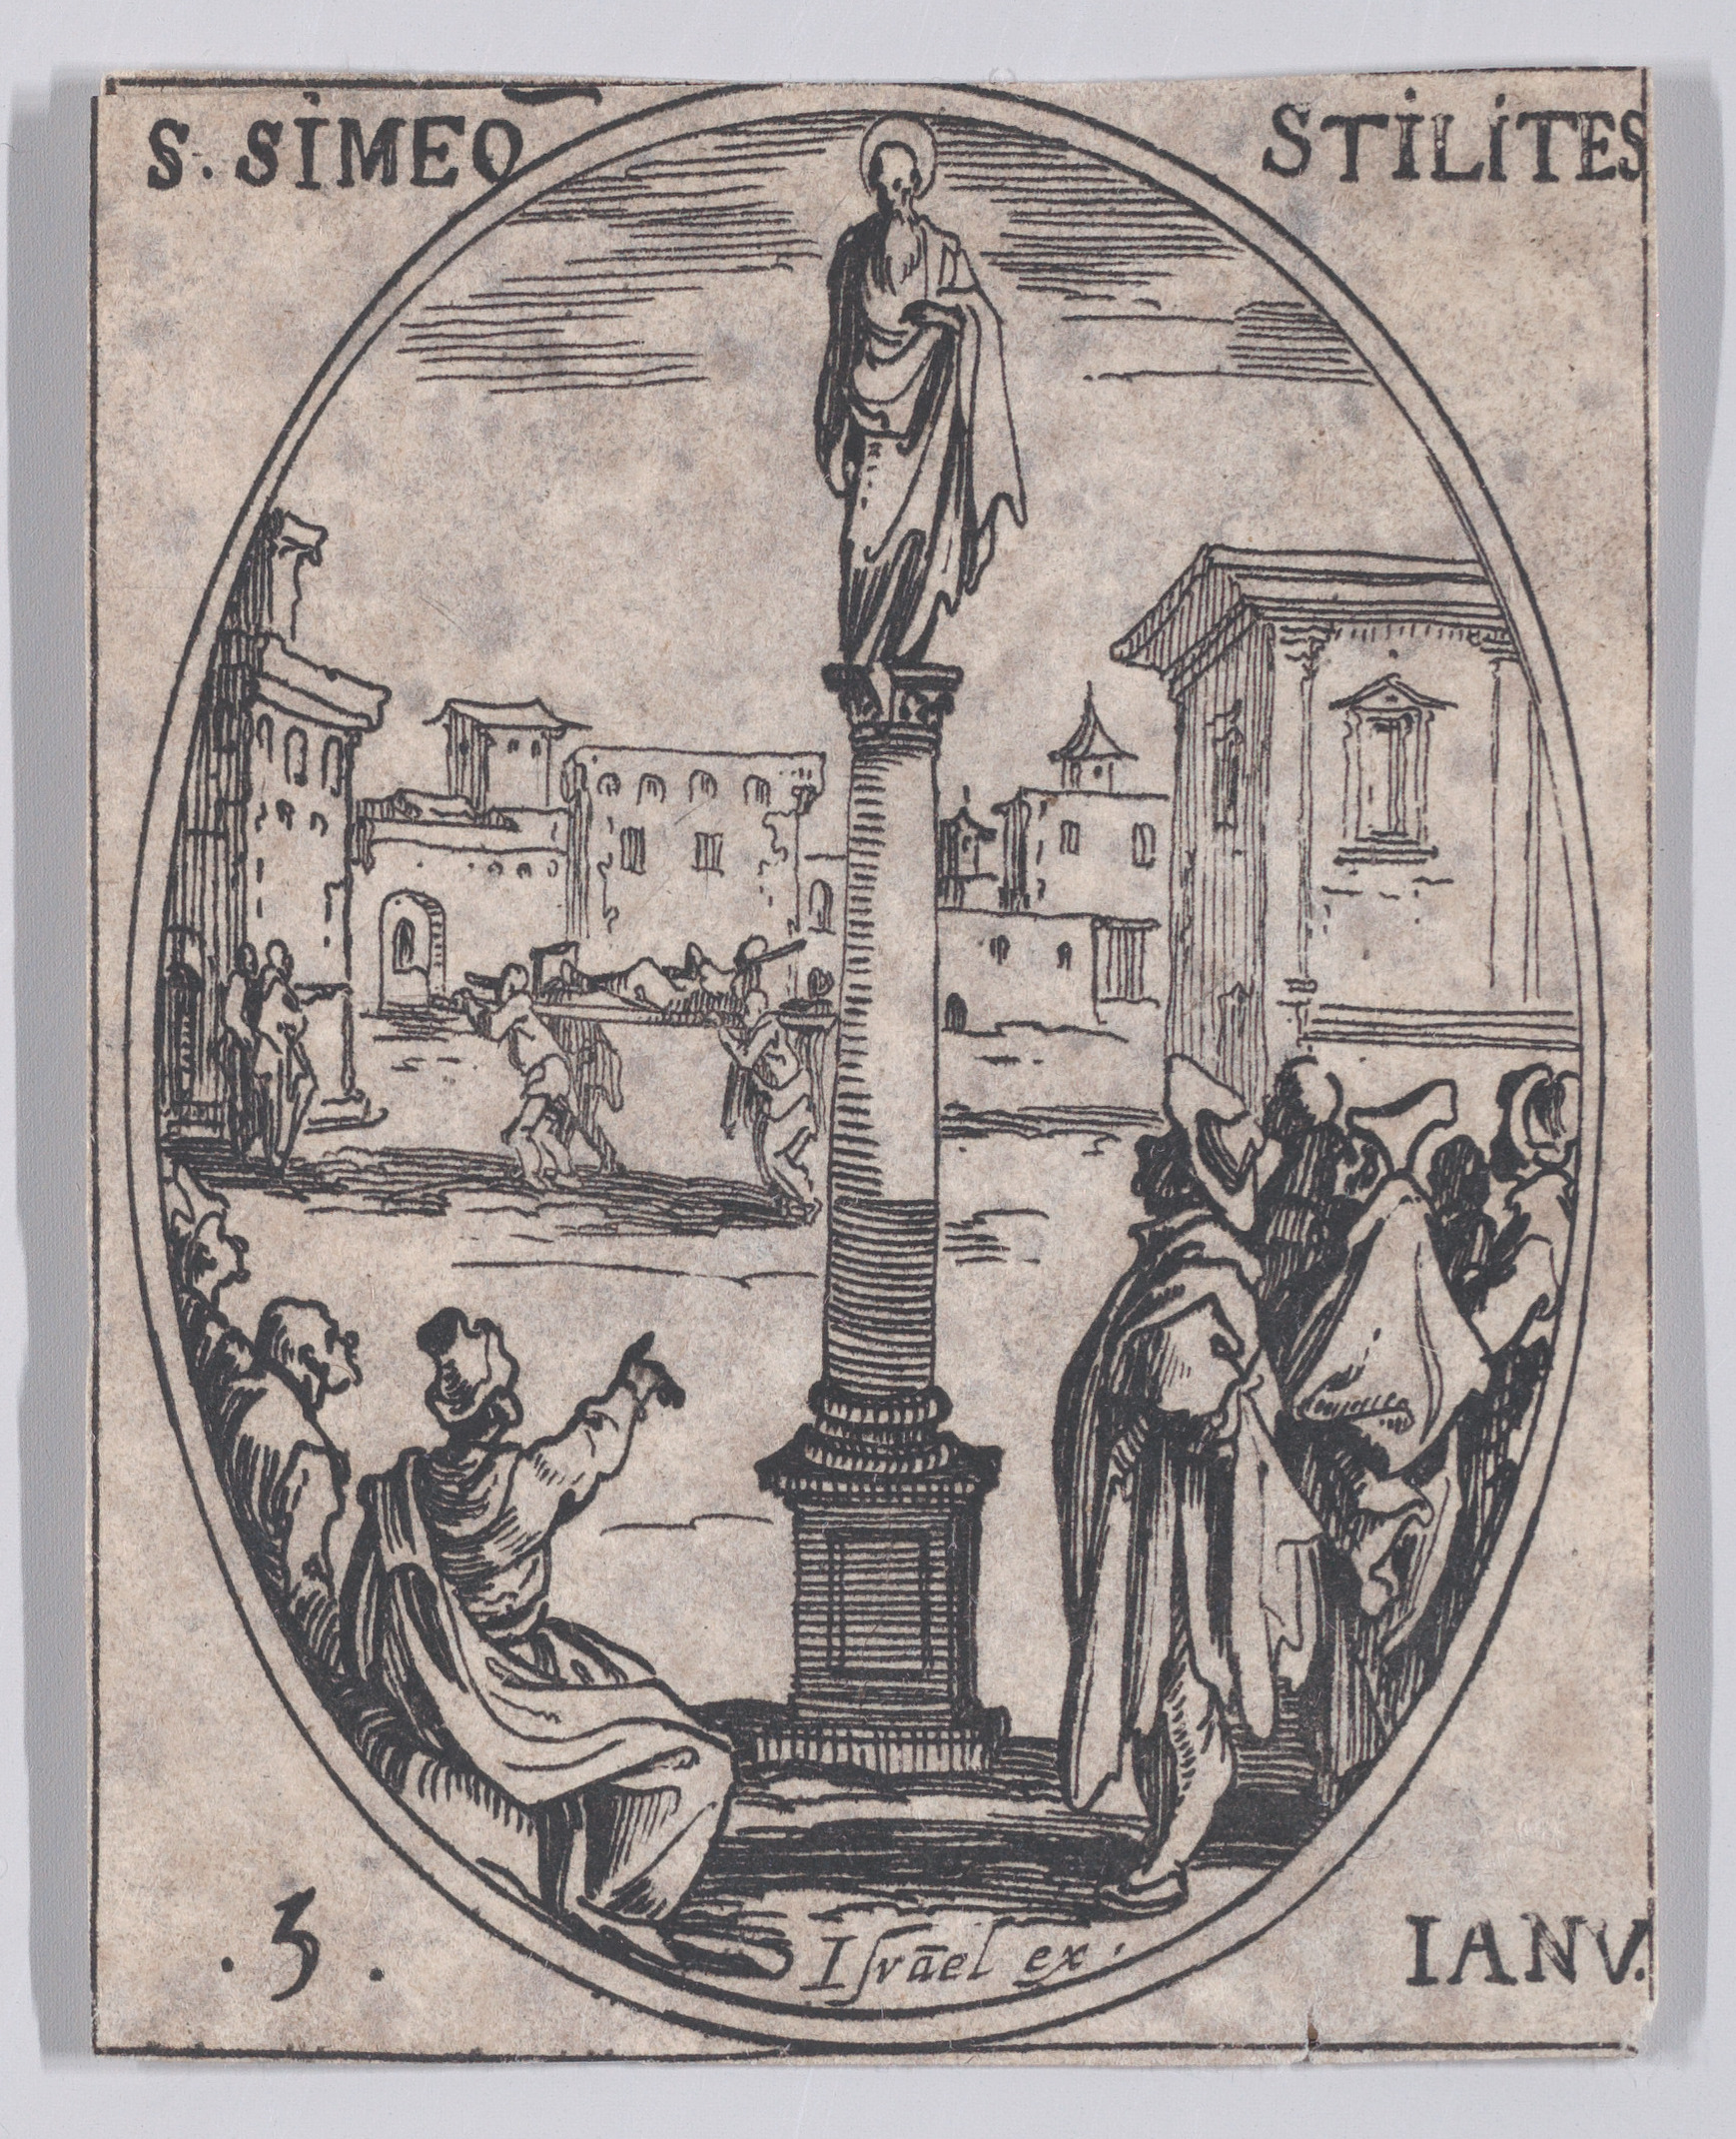 S. Siméone Stylite (St. Simeon Stylites), January 5th, from Les Images De Tous Les Saincts et Saintes de L'Année (Images of All of the Saints and Religious Events of the Year), Jacques Callot (French, Nancy 1592–1635 Nancy), Etching; second state of two (Lieure)